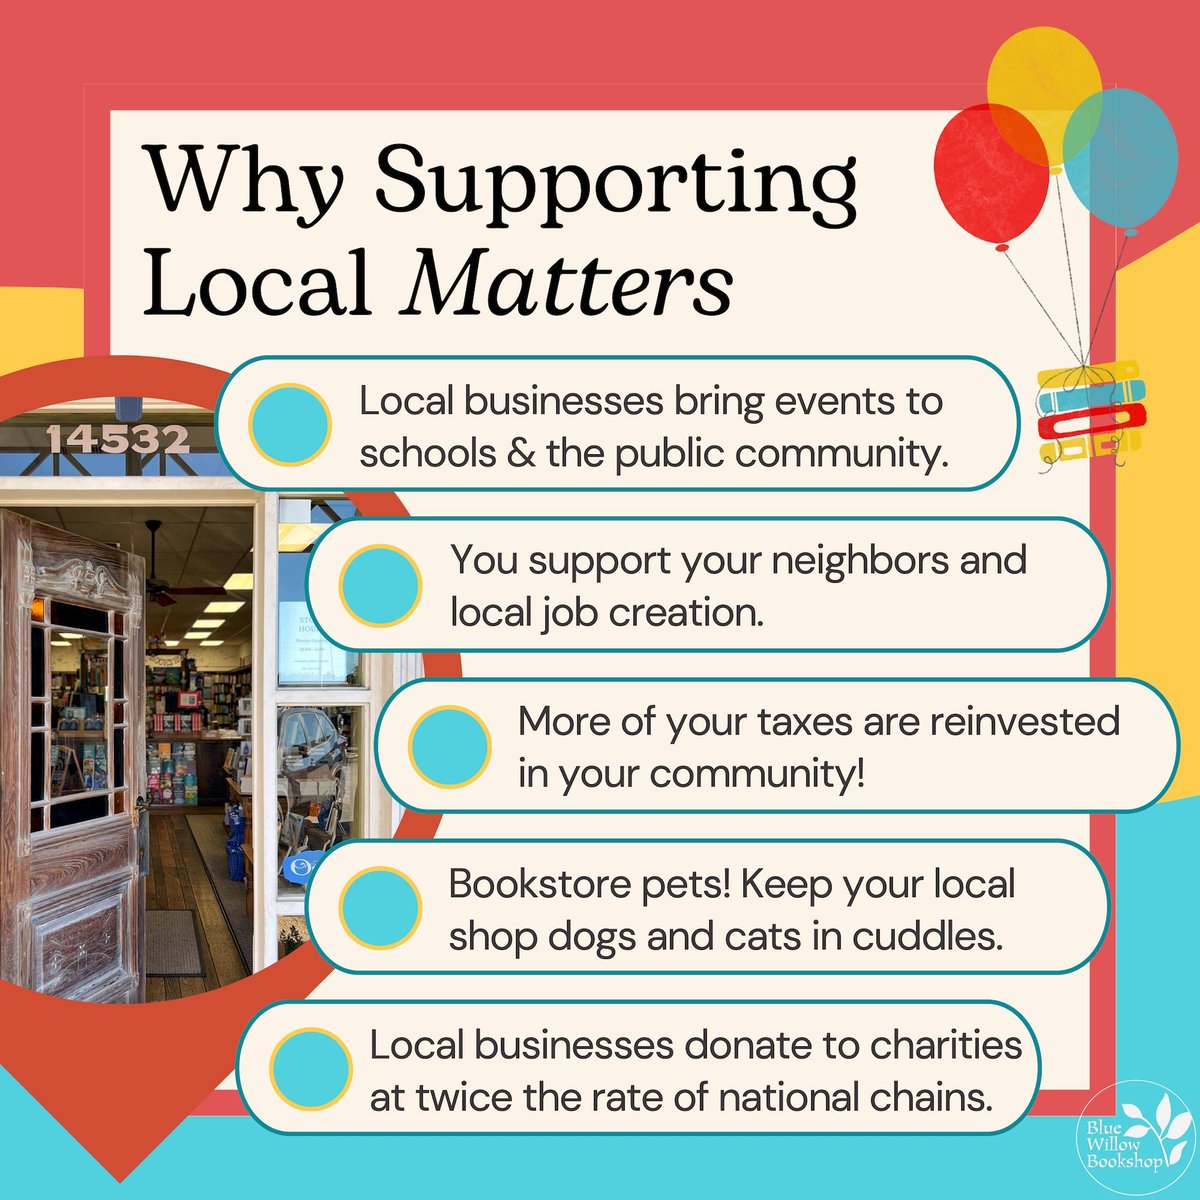 By choosing local when we can, we can create change together. ❤️ #ShopSmall #IndieBookstoreDay